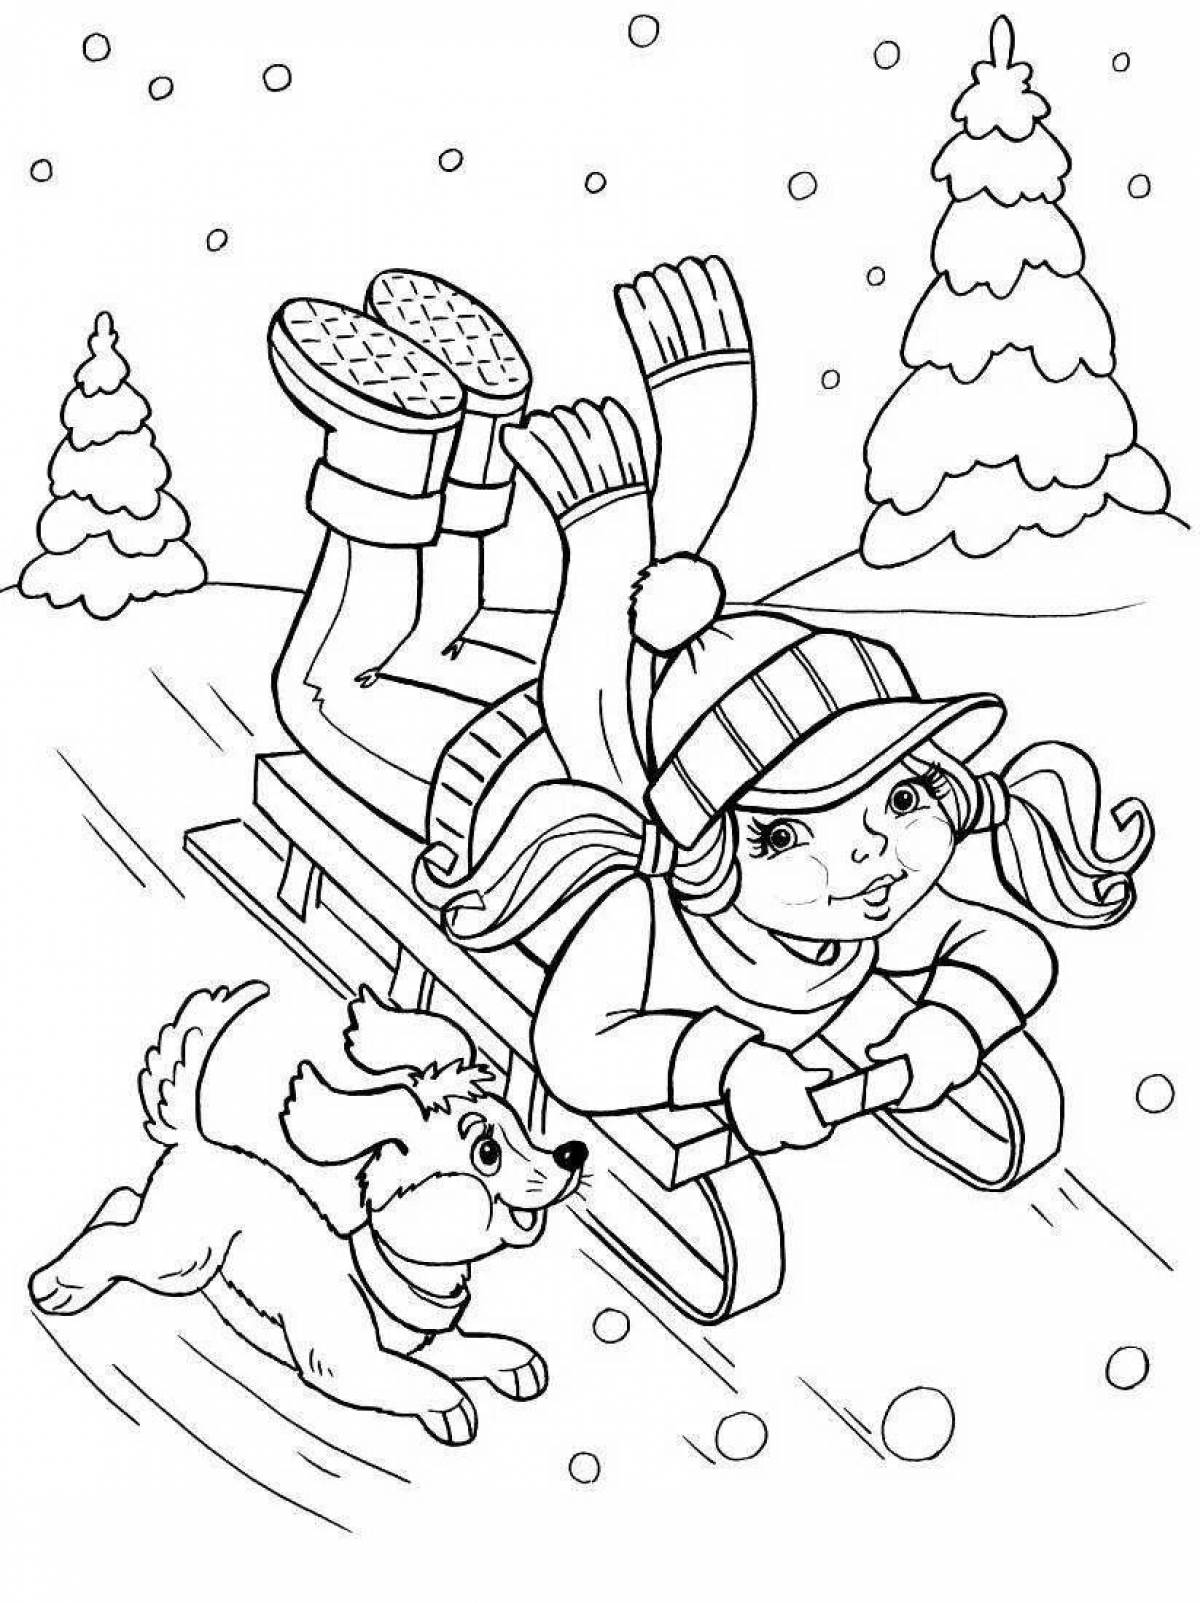 Elegant winter coloring book for 6-7 year olds